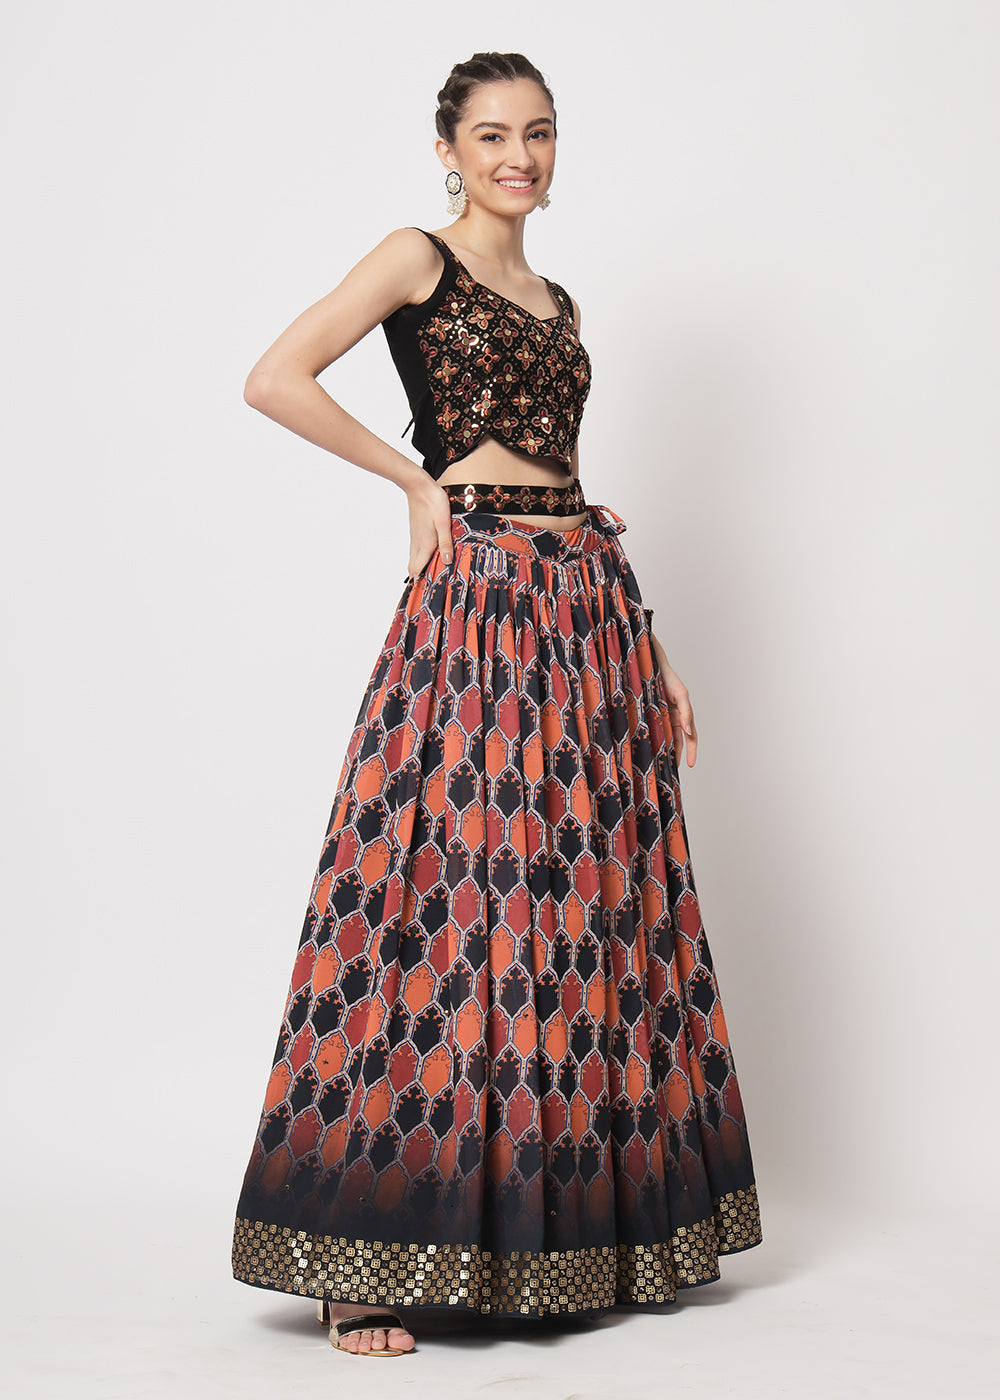 Buy Now Georgette Black Sequins & Printed Wedding Party Lehenga Choli Online in USA, UK, Canada & Worldwide at Empress Clothing. 